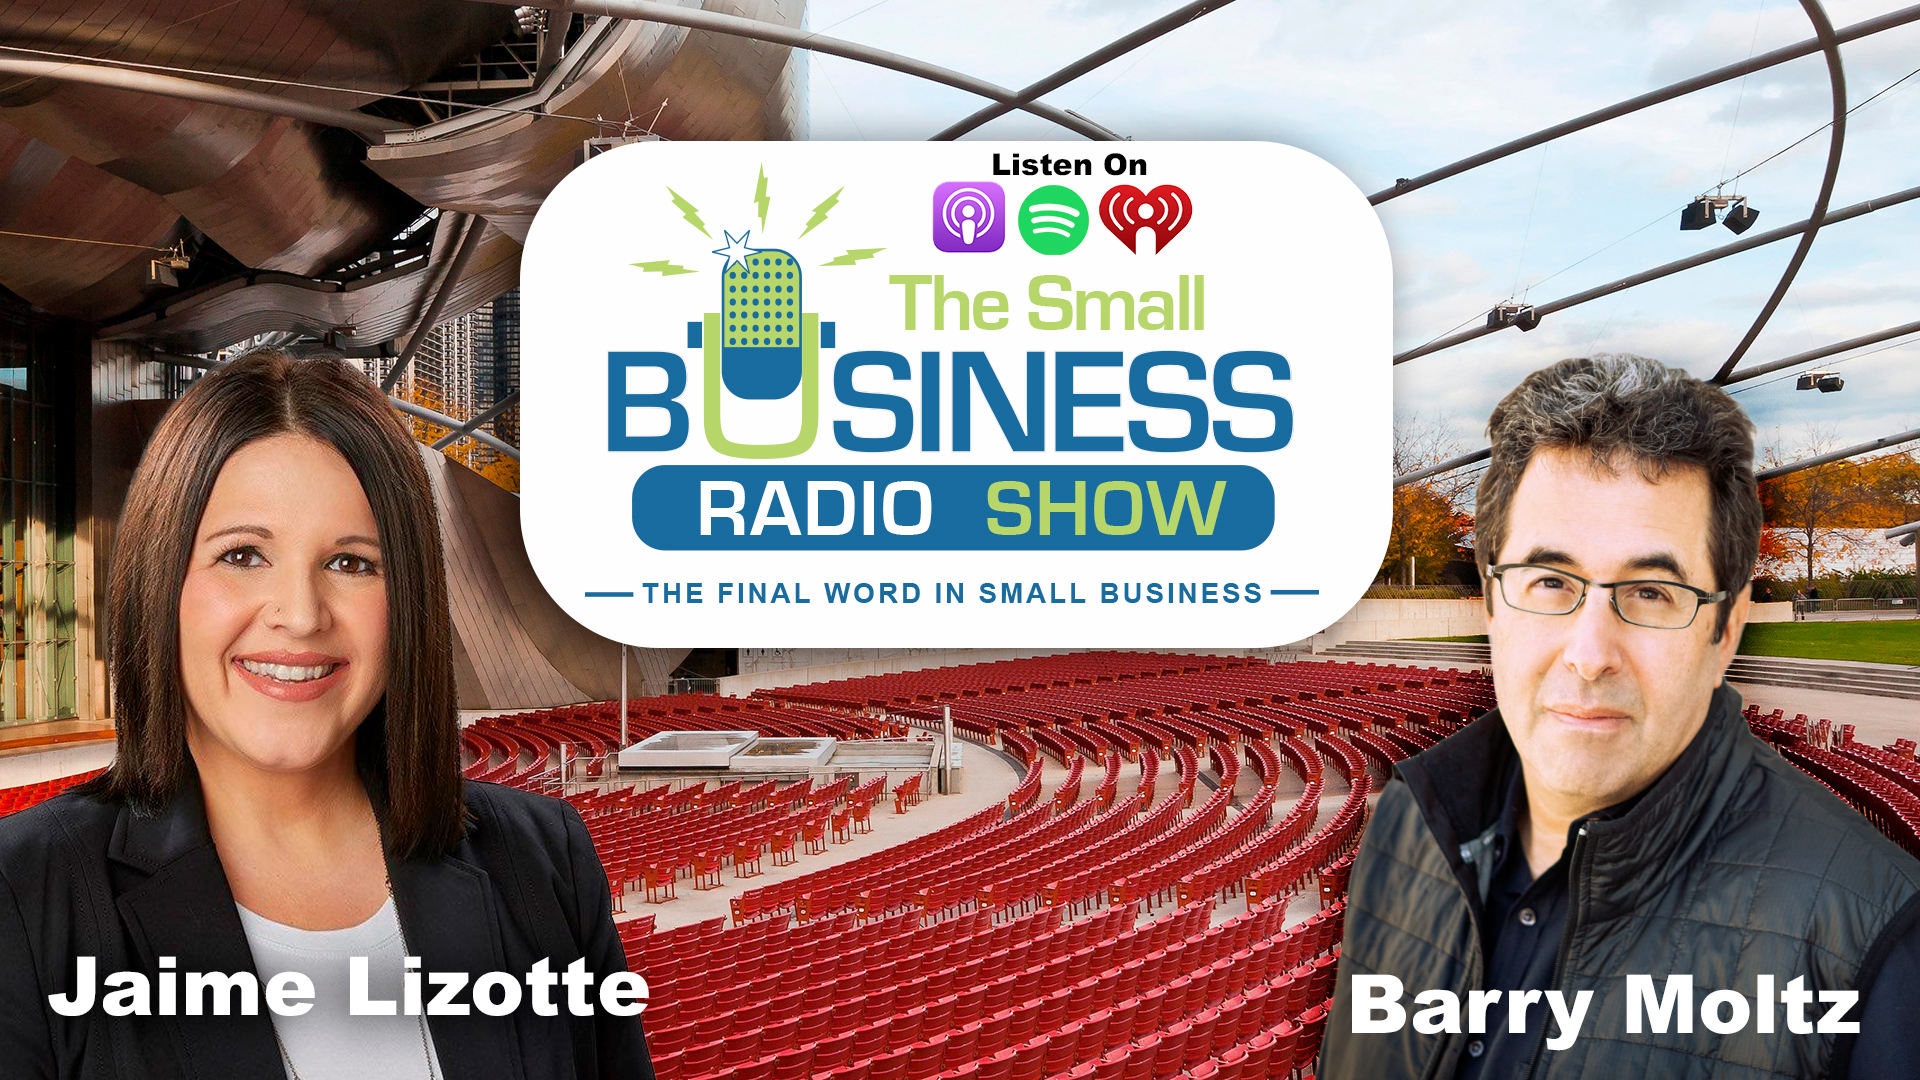 Jaime Lizotte on The Small Business Radio Show classify employees and independent contractors